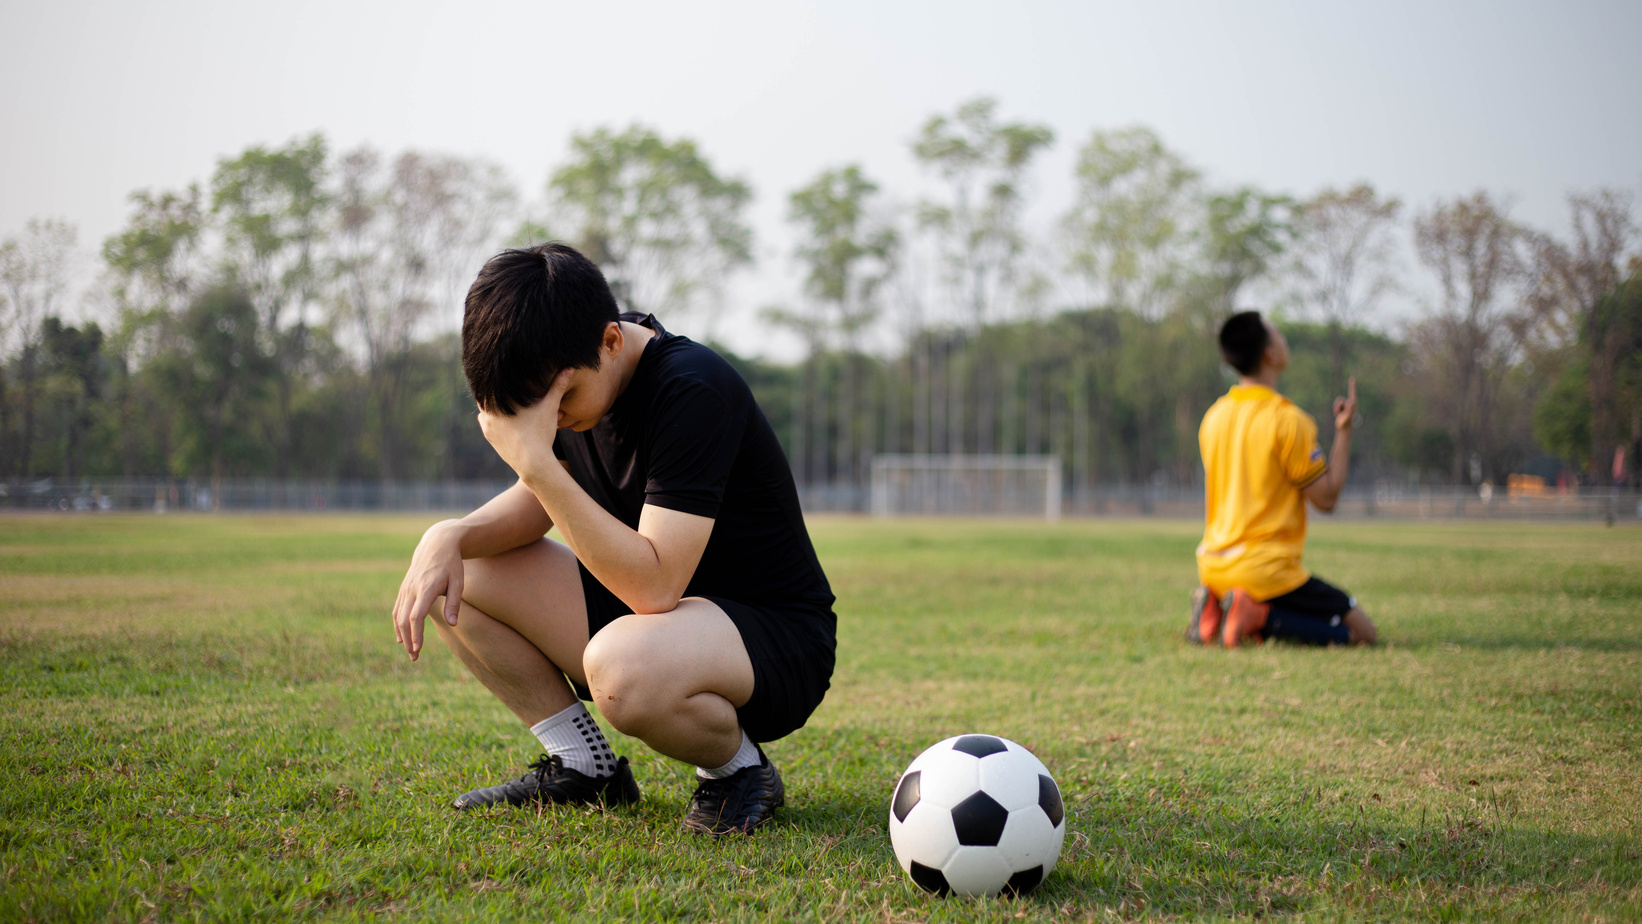 Sad Football Player Defeated in a Match